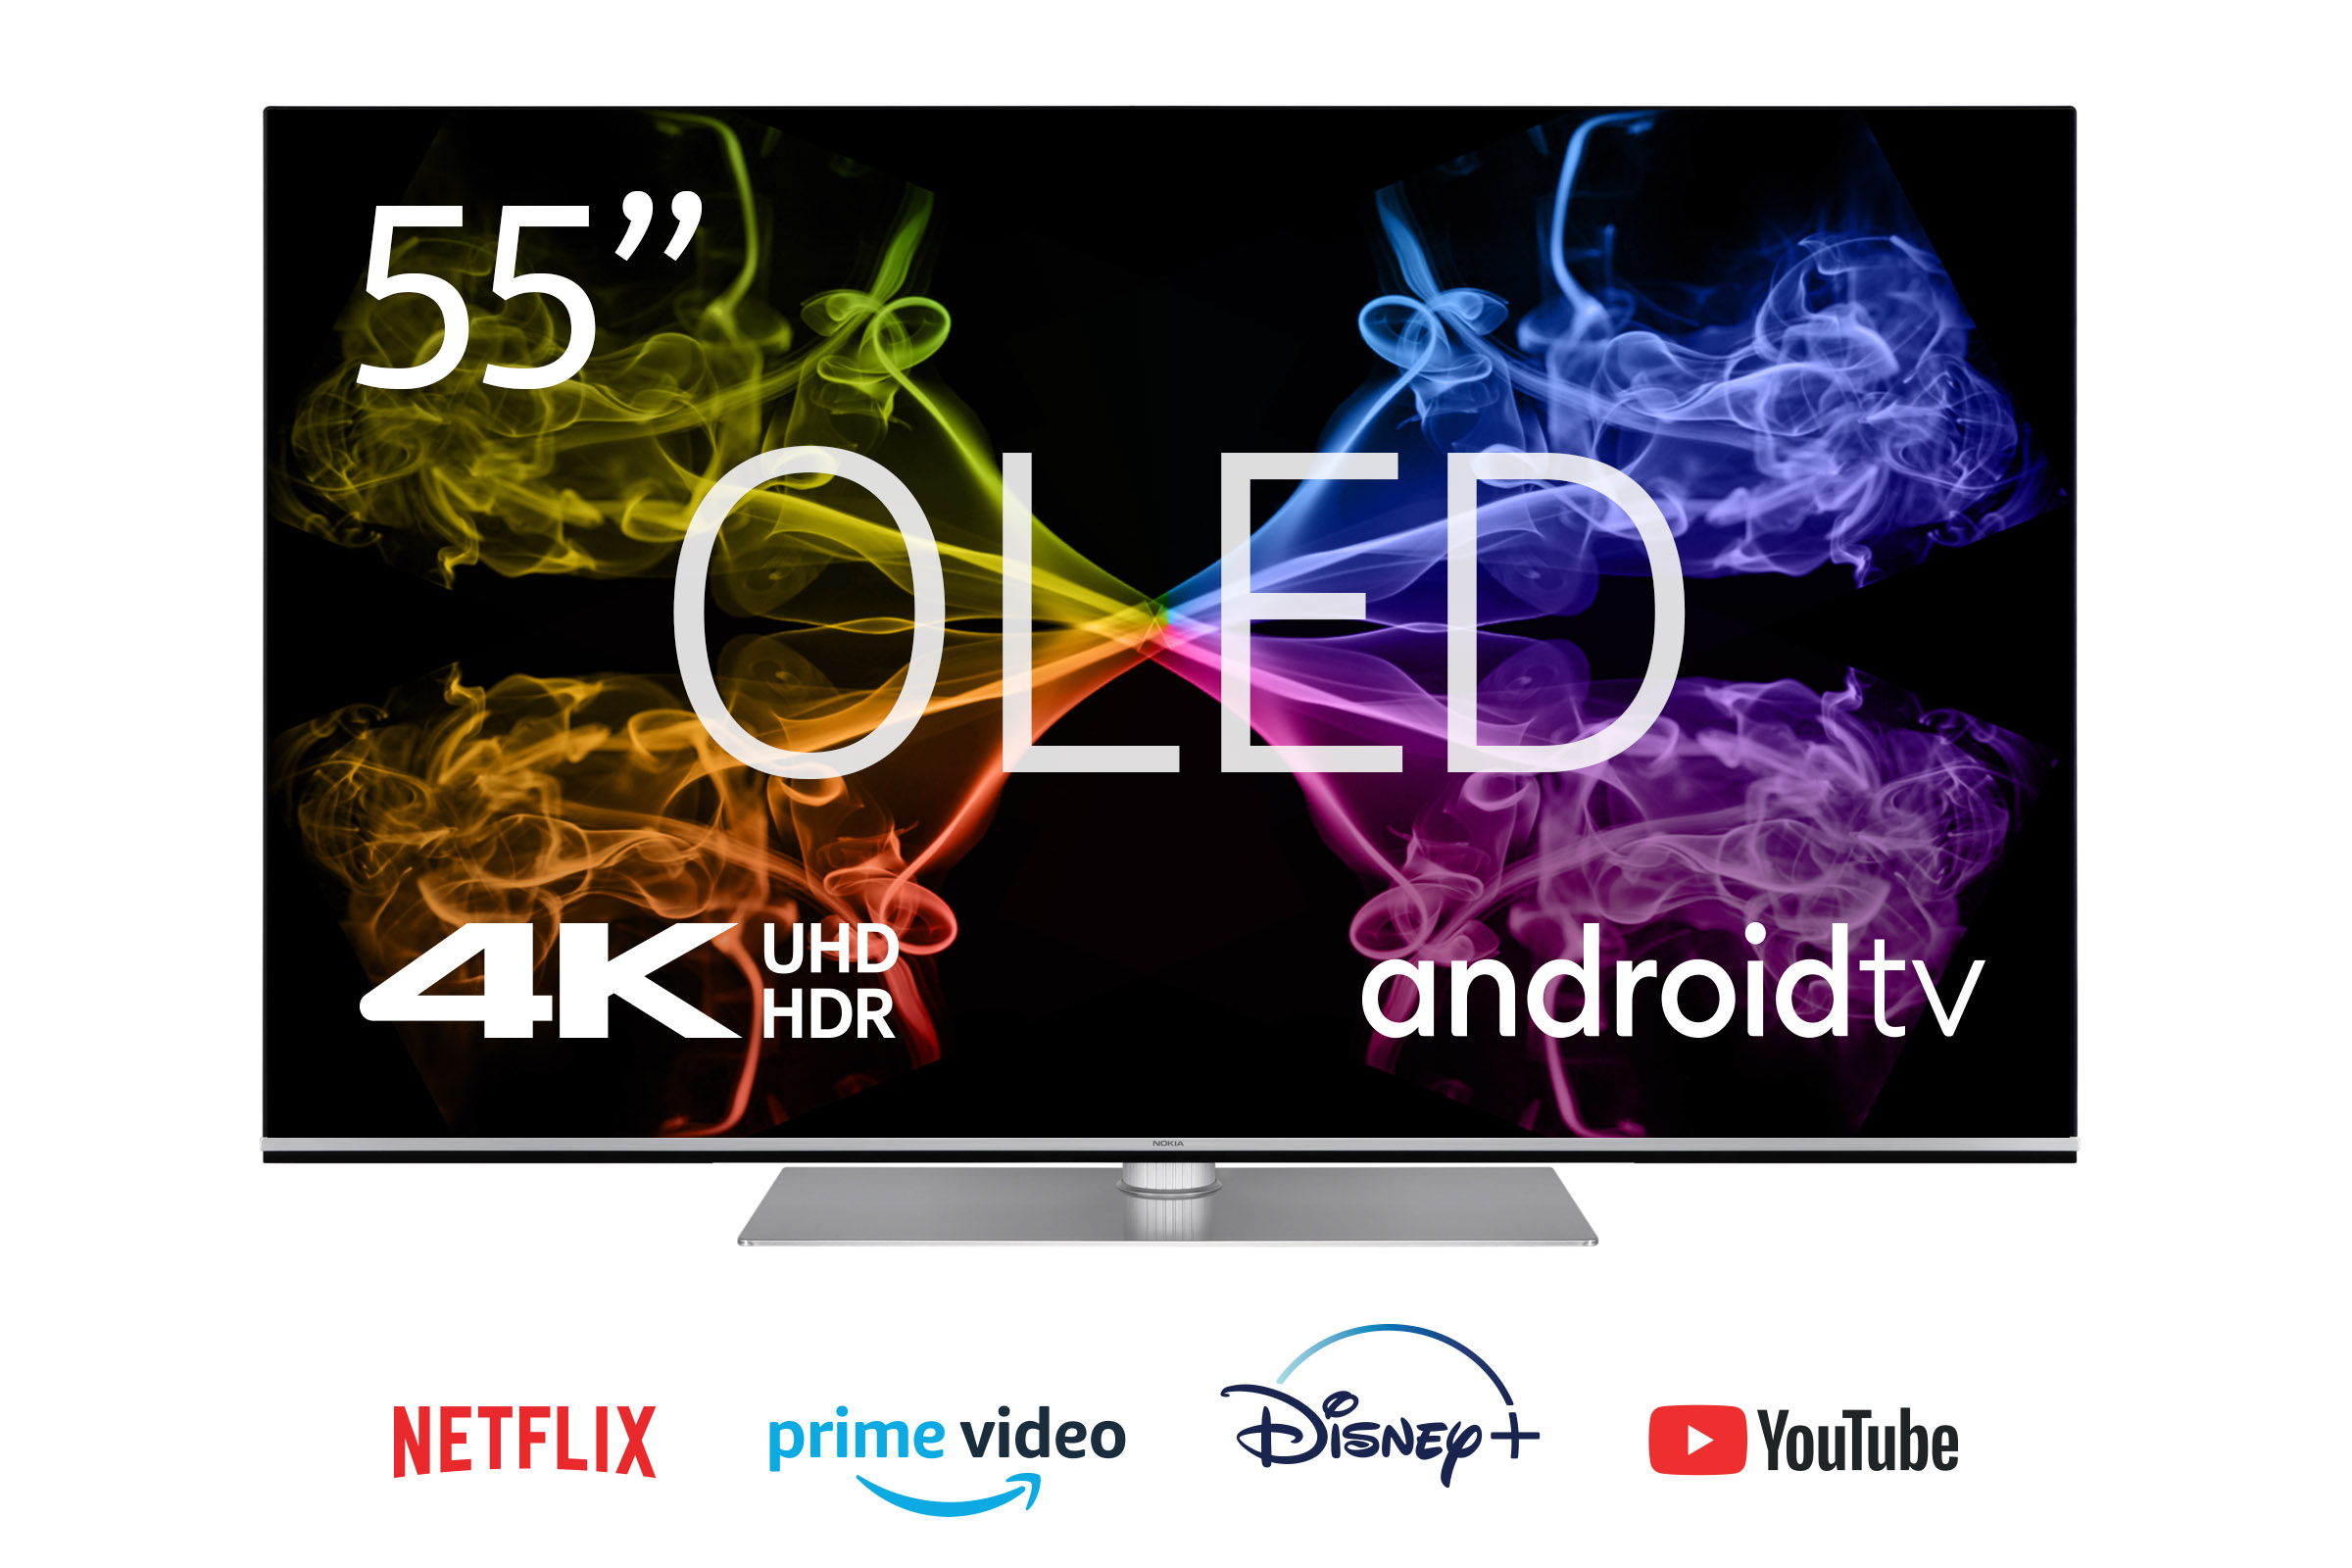 Nokia 55”4K UHD OLED Smart TV with Android TV